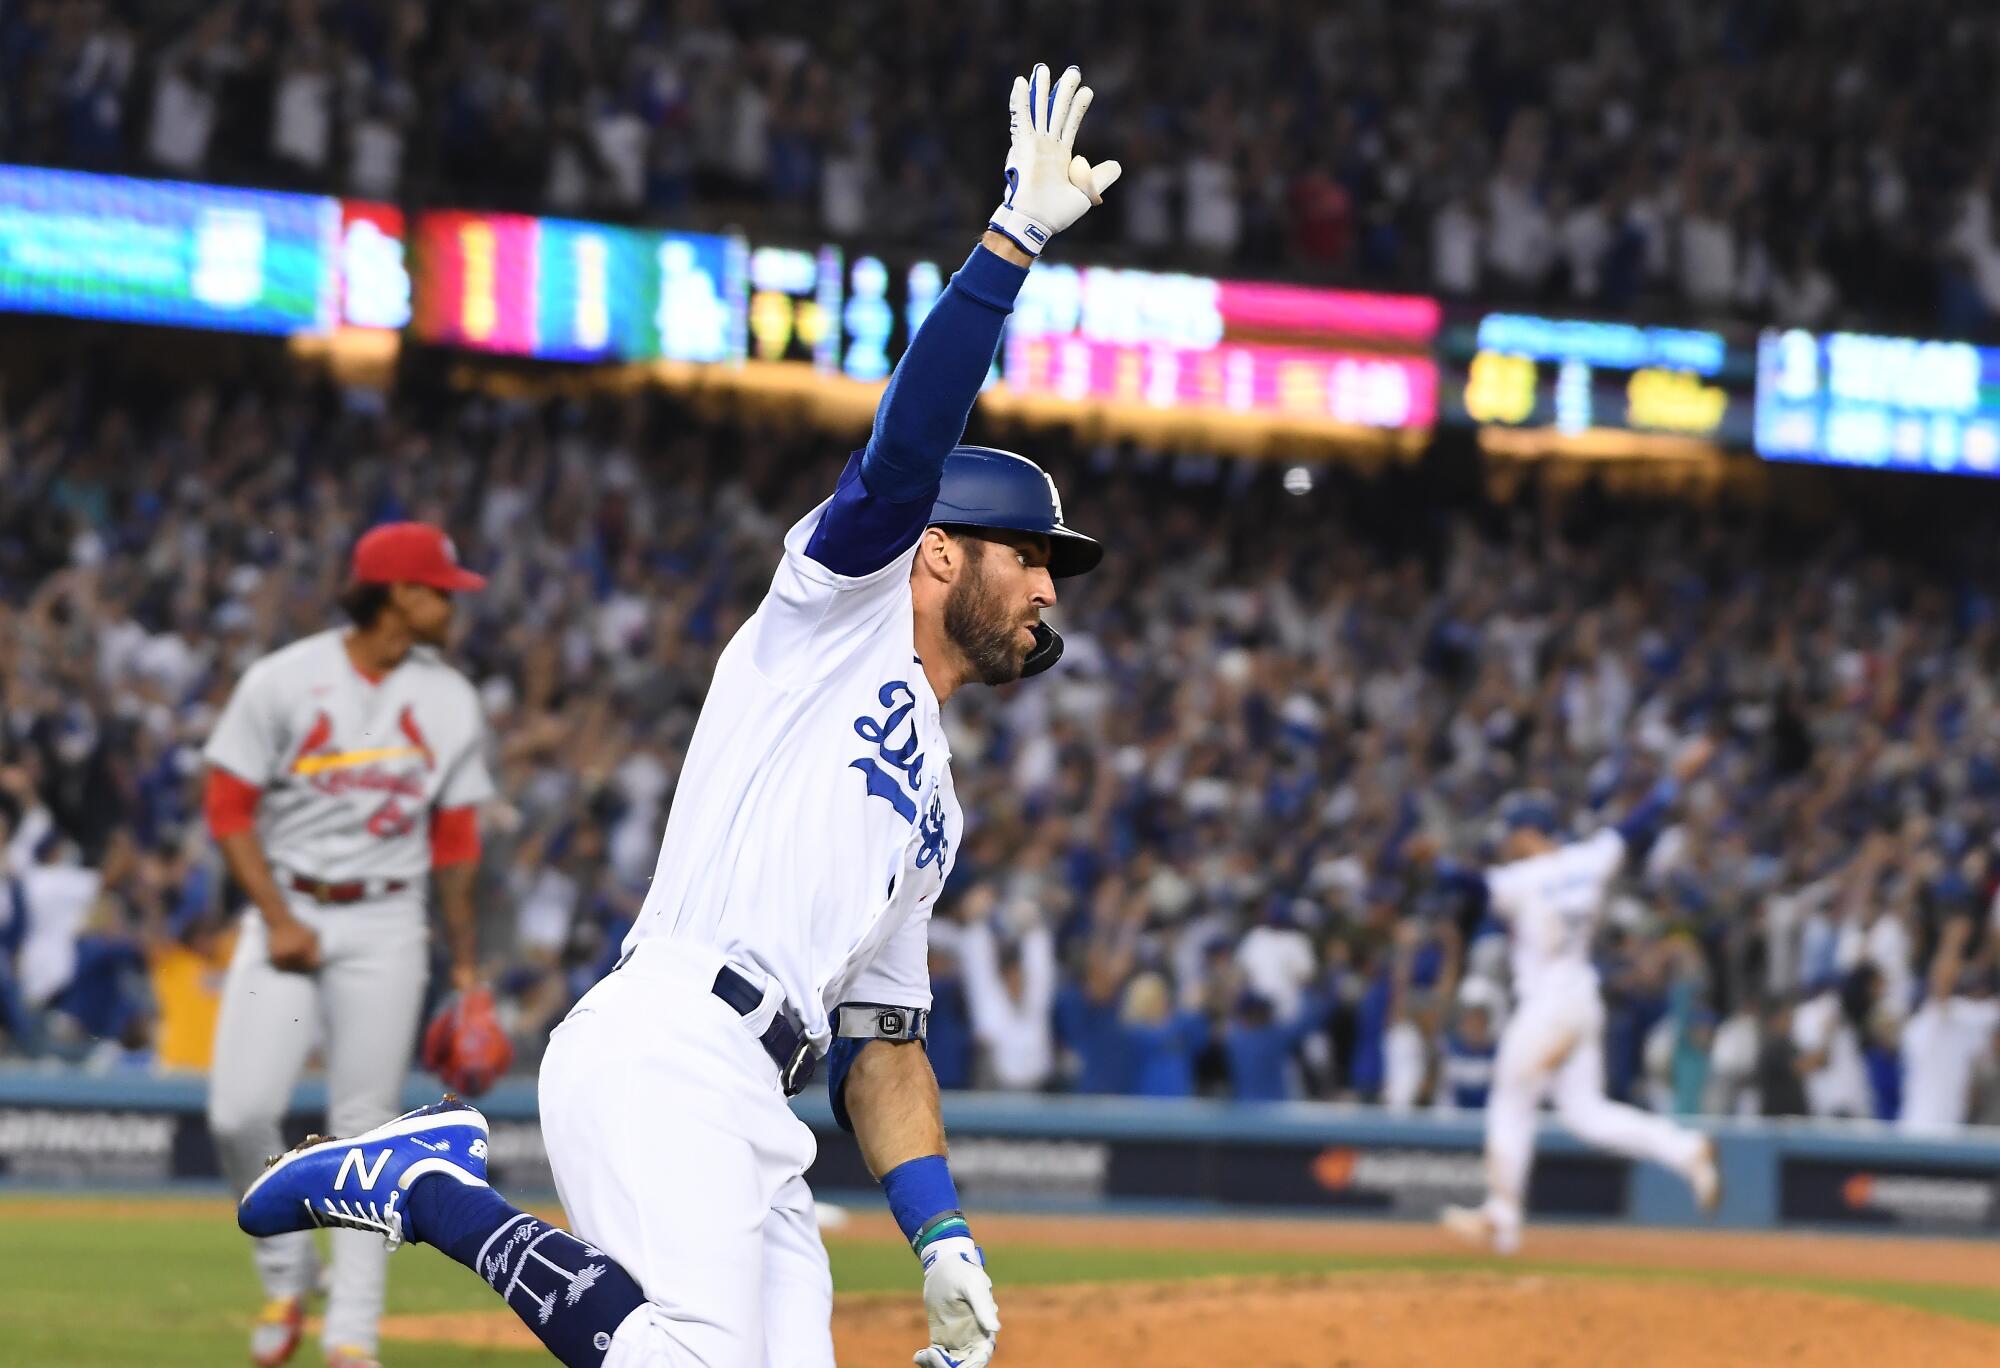 Chris Taylor celebrates while rounding the bases after hitting the game-winning two-run home run.